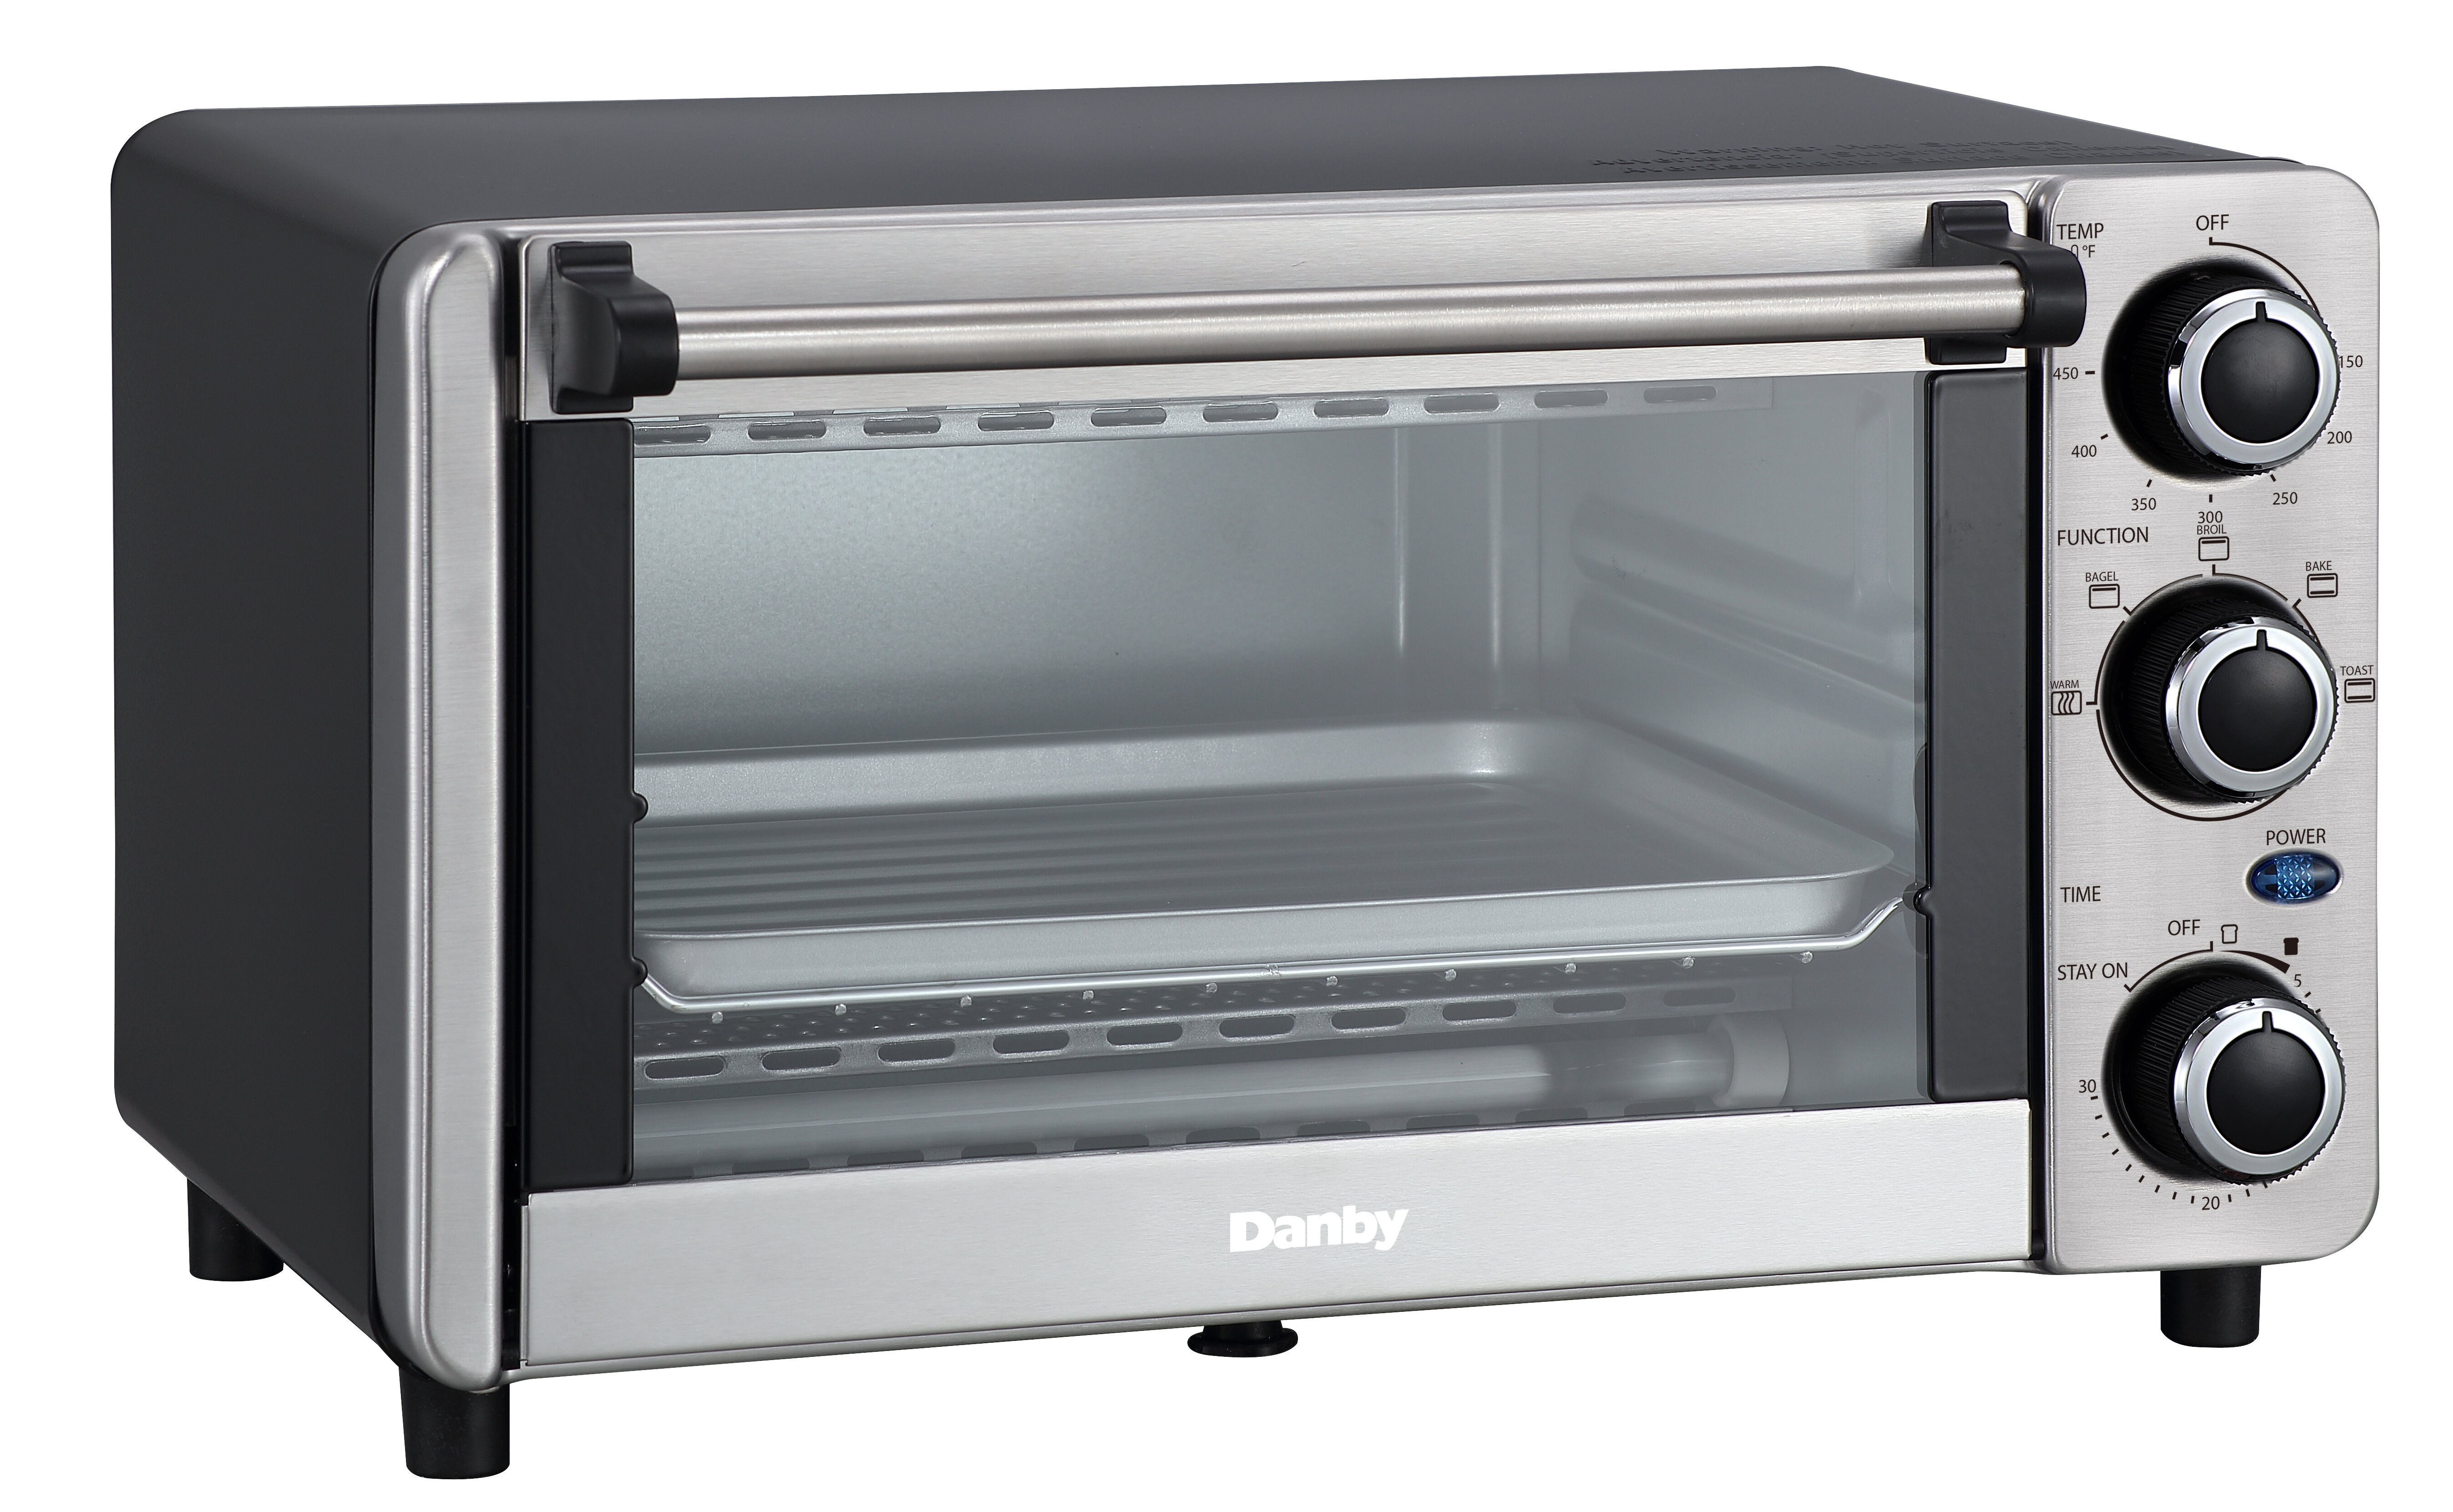 Danby 0.4 cu. ft./12L 4 Slice Countertop Toaster Oven in Stainless Steel -  DBTO0412BBSS